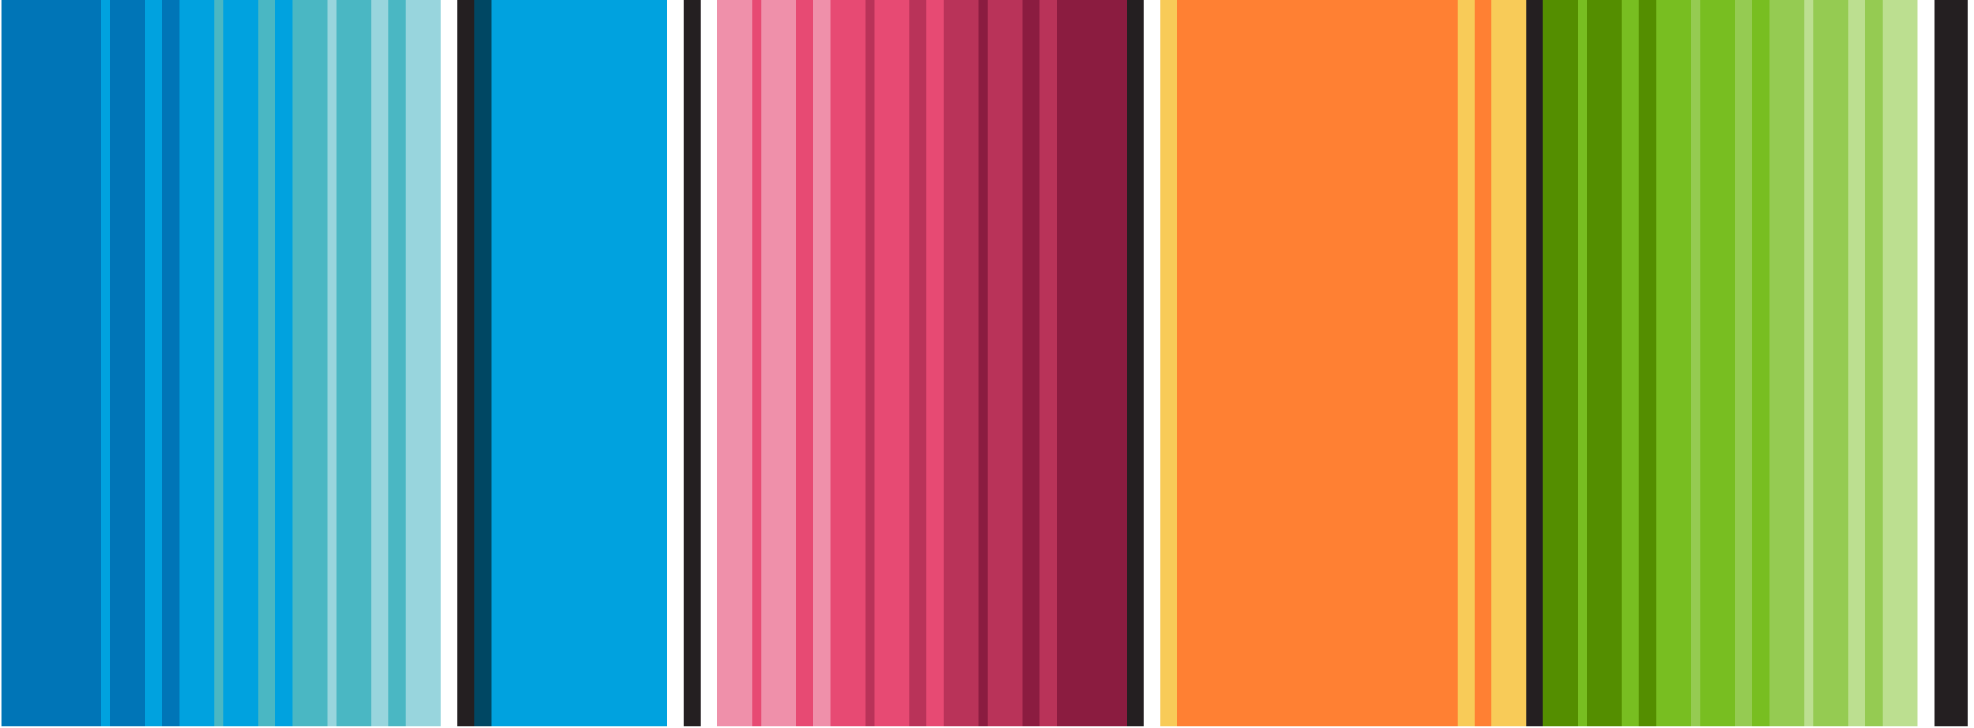 ASU Colors, lined up vertically to look like a serape design